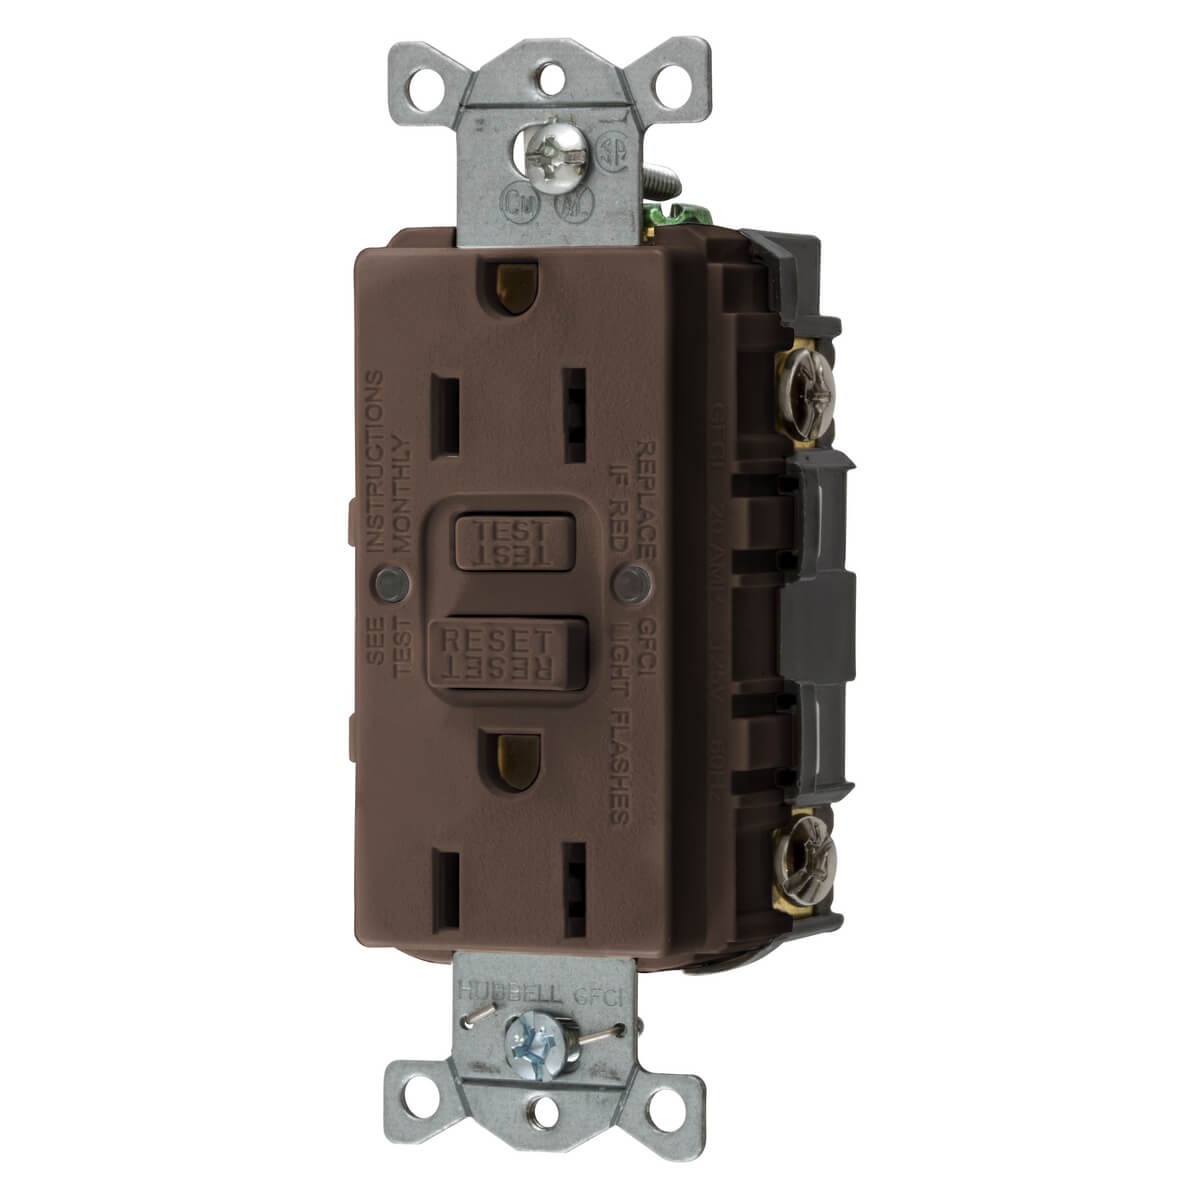 Gfci Receptacle, 15A 125V, 2-Pole 3-Wire Grounding, 5-15R, Brown